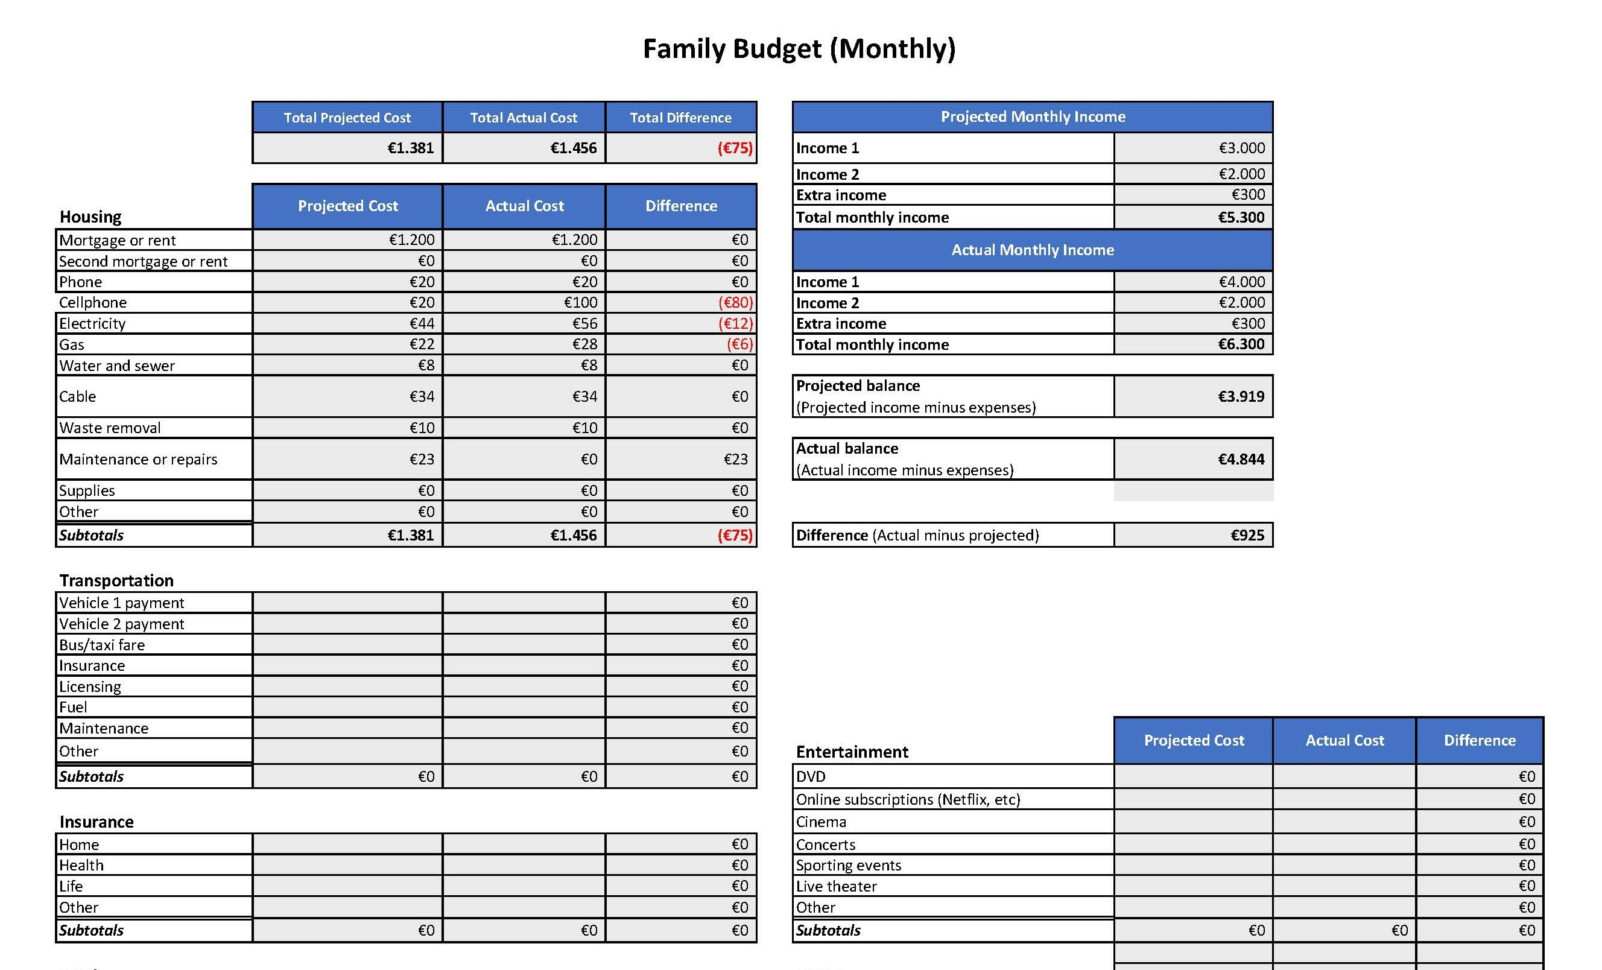 Family Budget Spreadsheet Eur | Templates At Allbusinesstemplates and